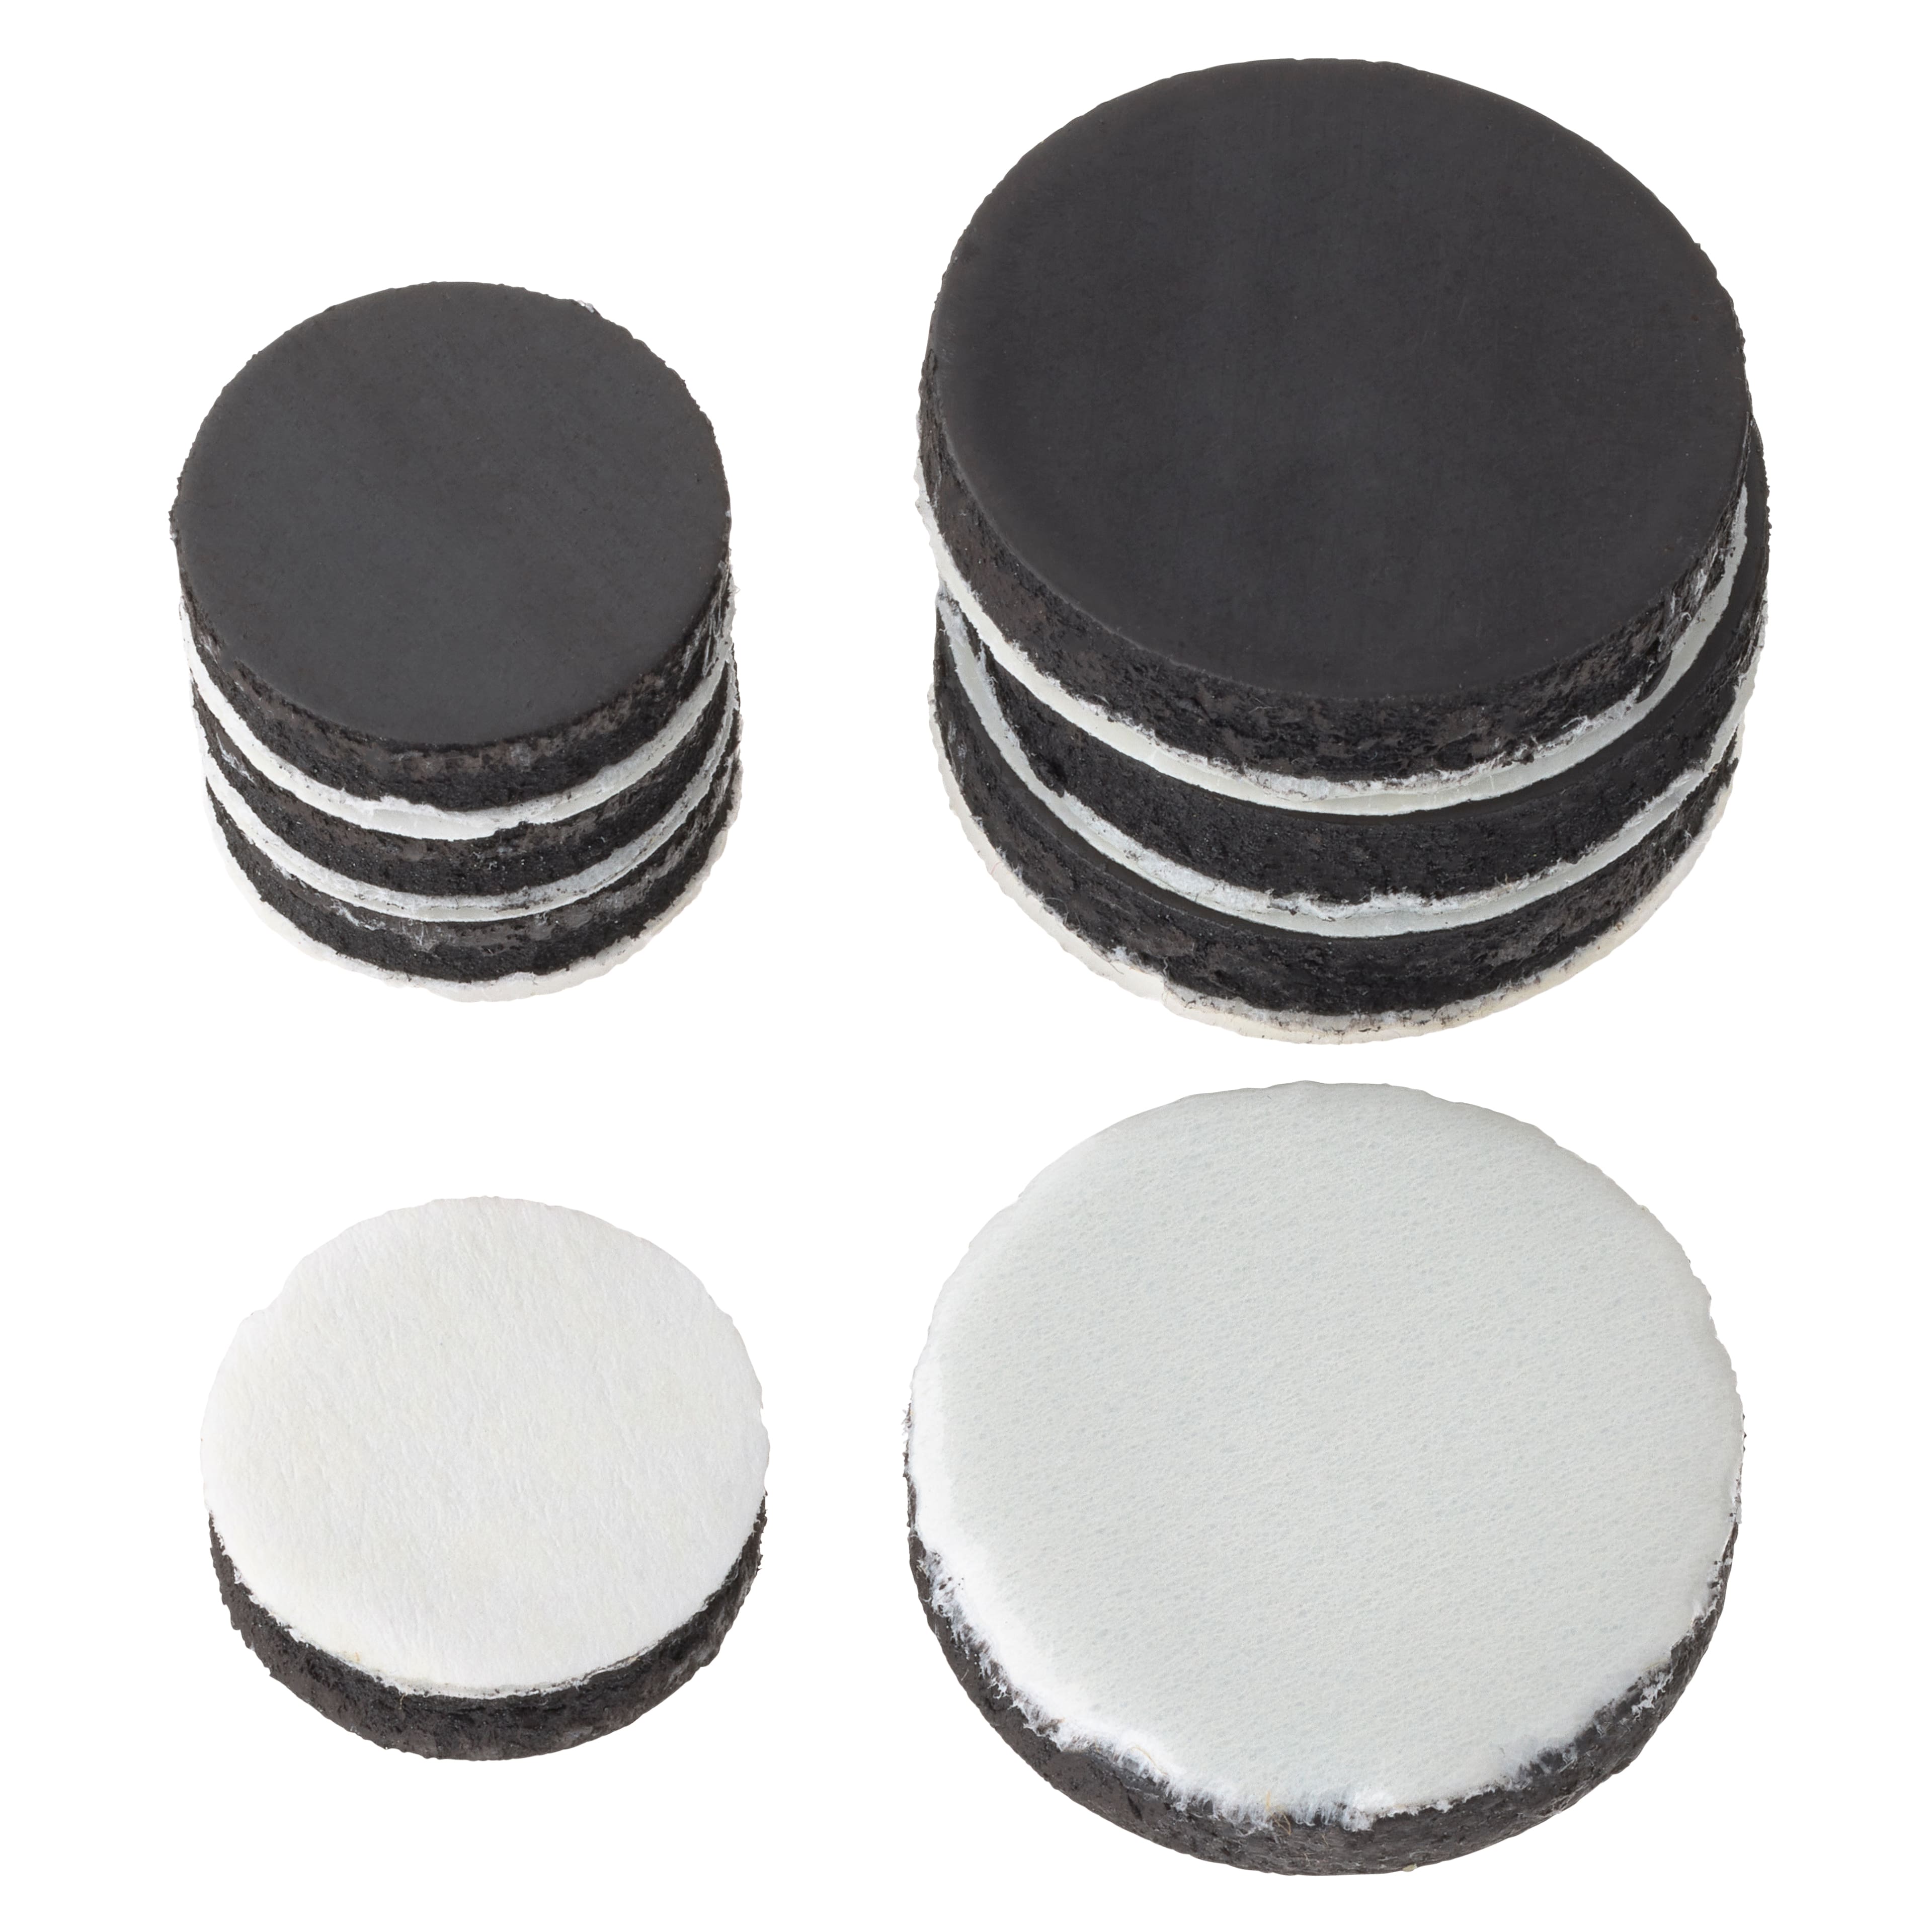 12 Packs: 8 ct. (96 total) Pro MAG&#xAE; Round Magnets with Foam Adhesive